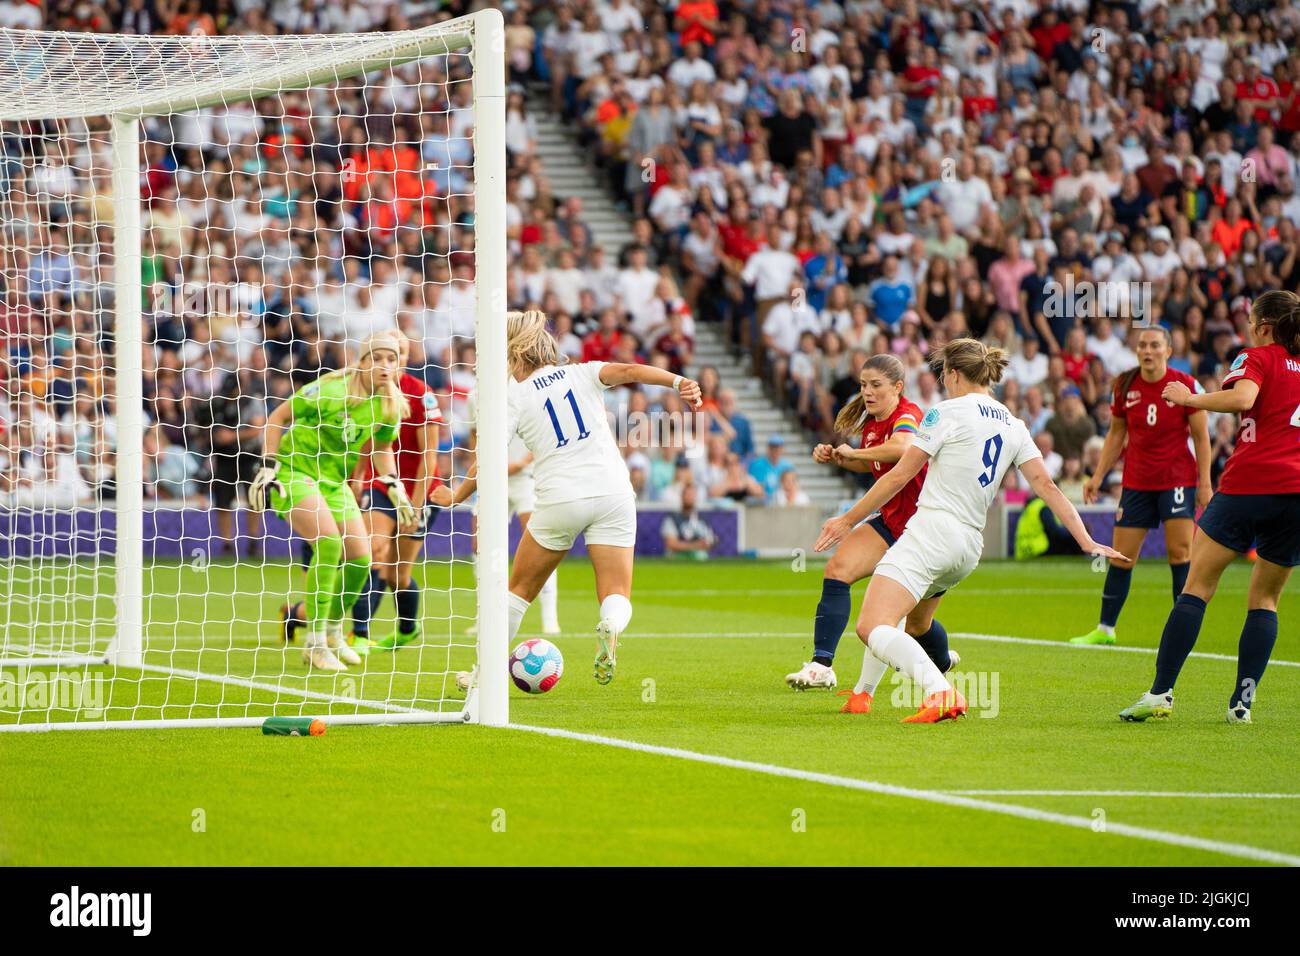 Brighton, UK. 11th July, 2022. Lauren Hemp (11 England) scores Englands second goal (2-0) during the UEFA Womens Euro 2022 football match between England and Norway at the Community Stadium in Brighton, England. (Foto: Sam Mallia/Sports Press Photo/C -  - Alamy) Credit: SPP Sport Press Photo. /Alamy Live News Stock Photo